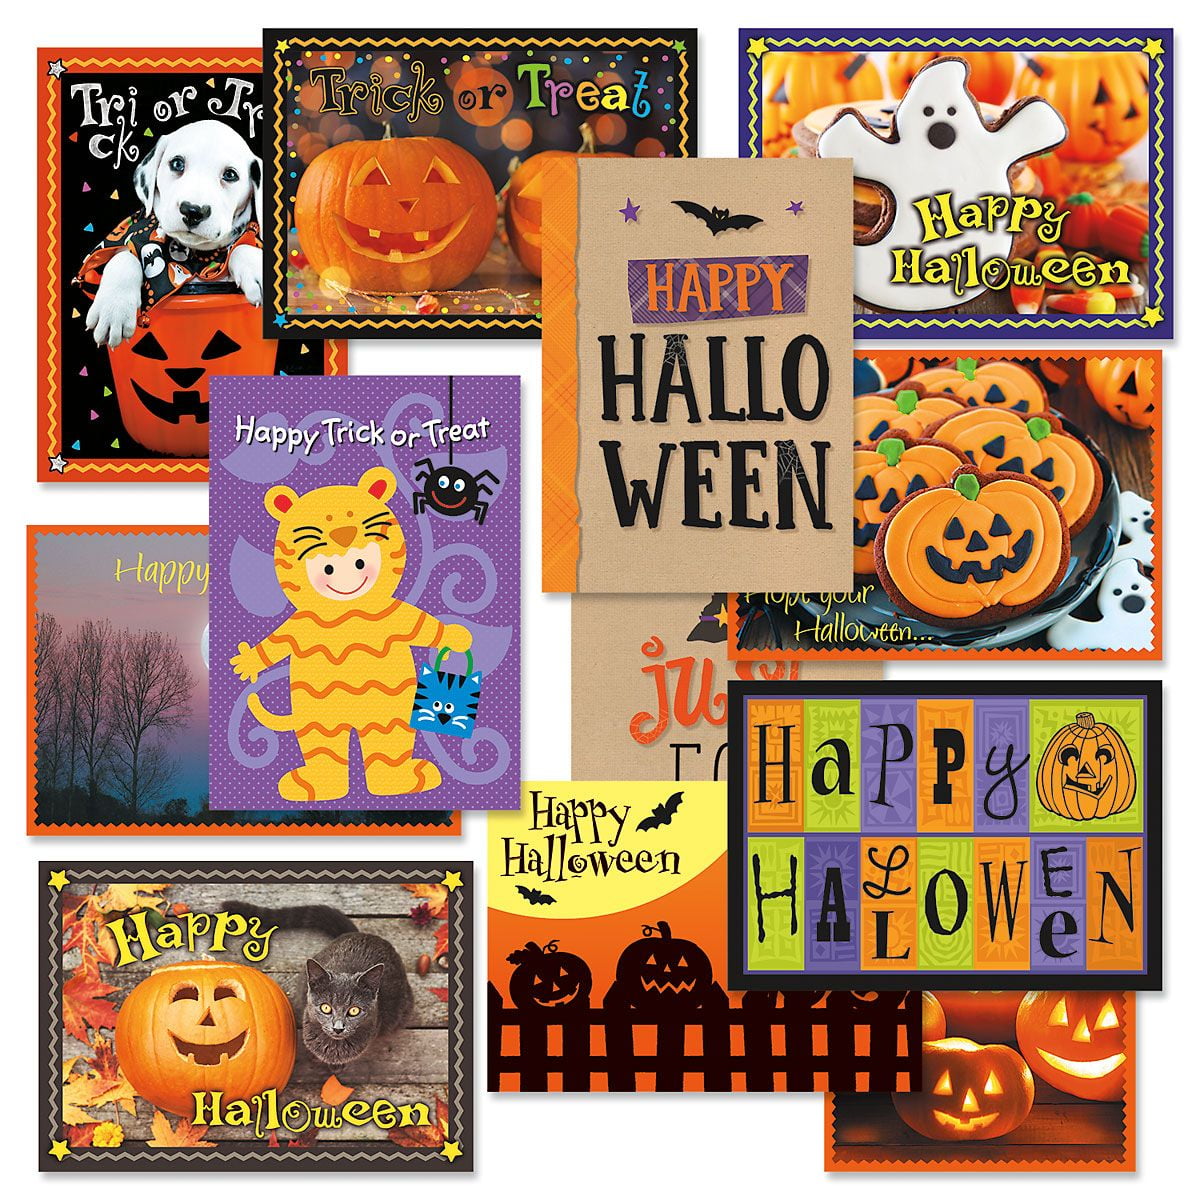 Magic Moments Halloween Greeting Cards Made In U.S.A. 6 Details about   Six 